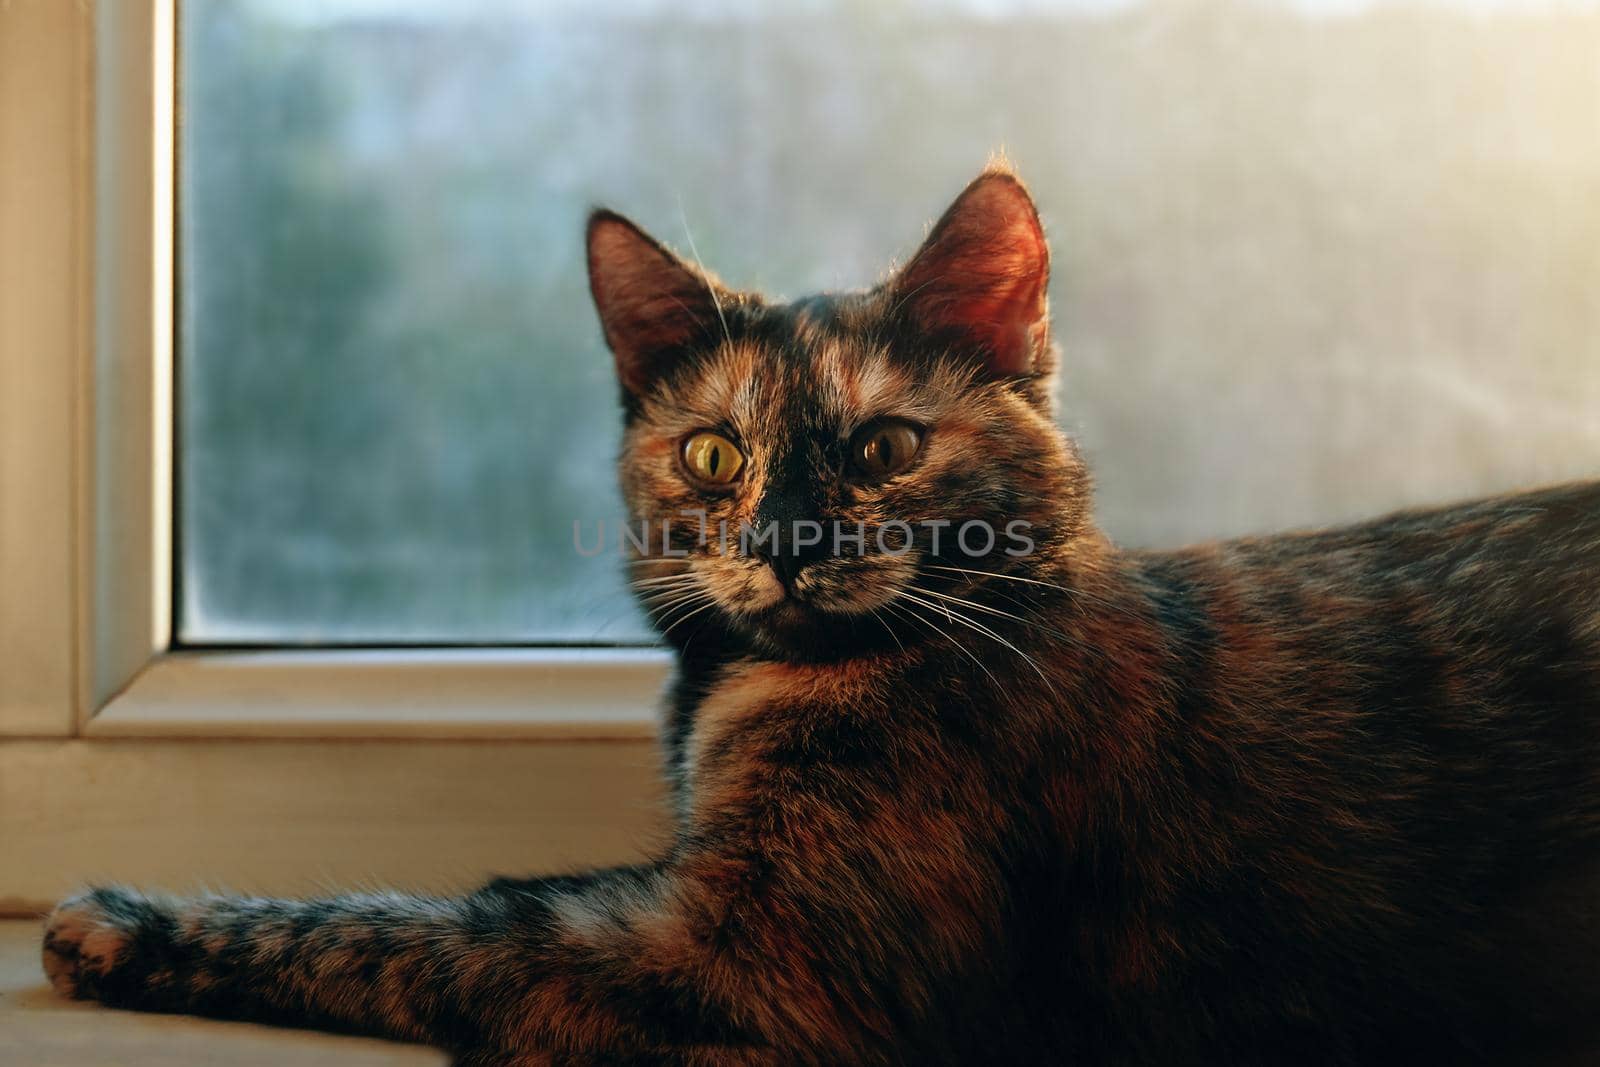 Lazy colorful cat lying by window. Domestic lovely kitten with beautiful eyes relaxing on window sill. Sunny day outside.